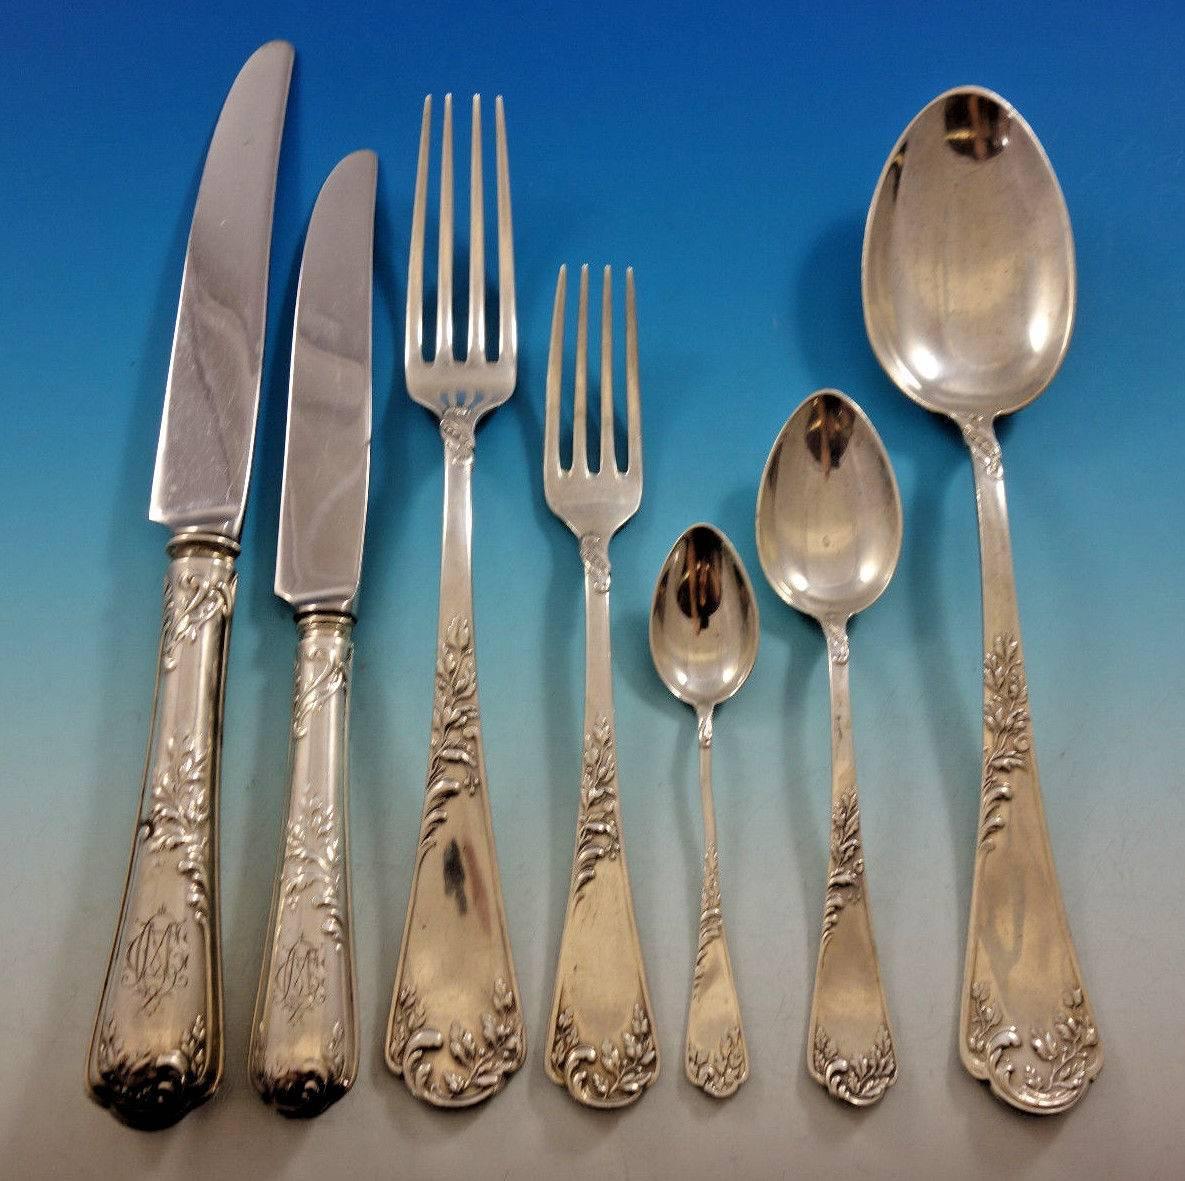 Art Nouveau German 800 Silver Flatware Set Service with lovely leaf detailing, 42 Pieces. This set includes: 

6 DINNER KNIVES, 10 1/8